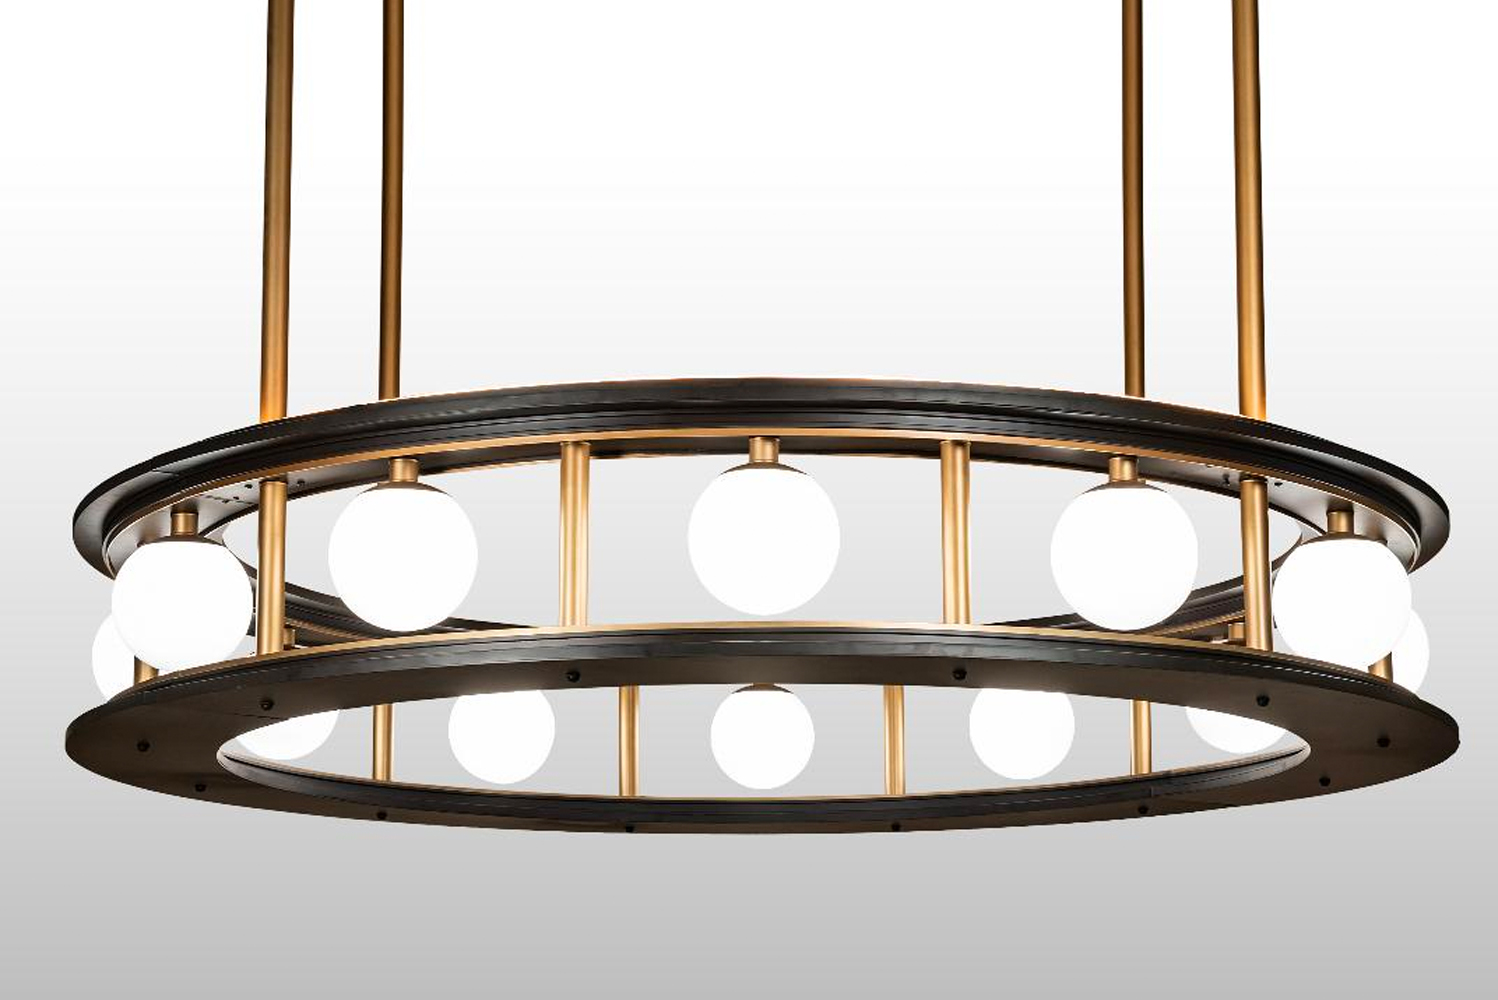 The pendant is engineered in sections and can be assembled on-site to encompass a column at the location